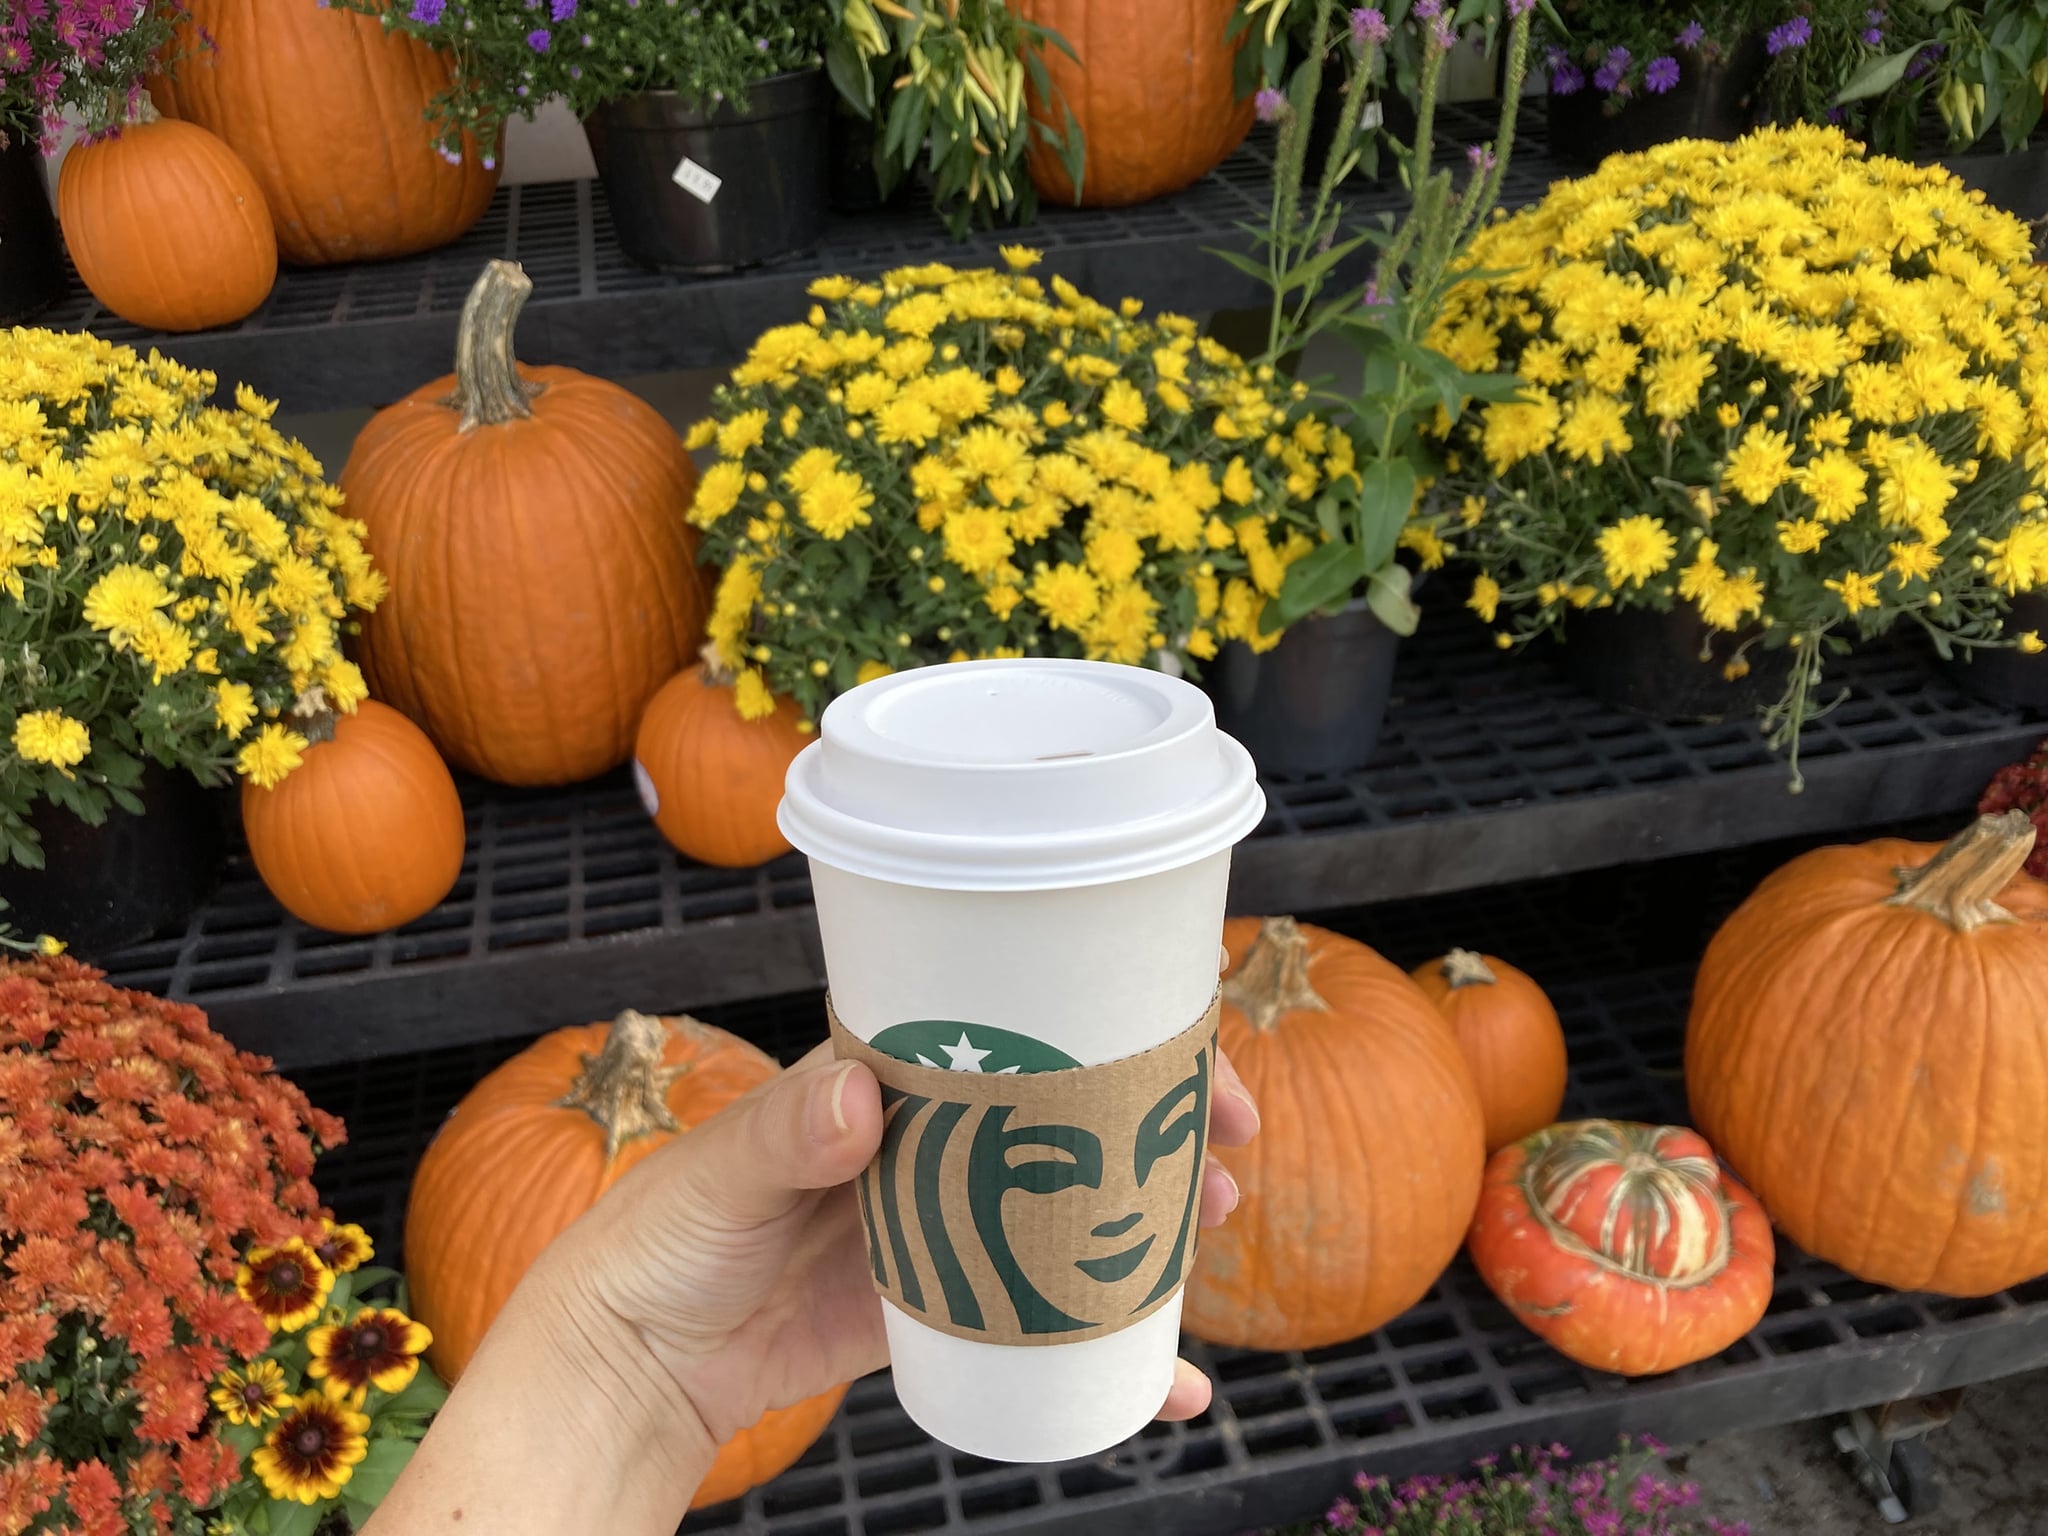 A reporter's pumpkin spice latte, purchased at a Starbucks in Baltimore